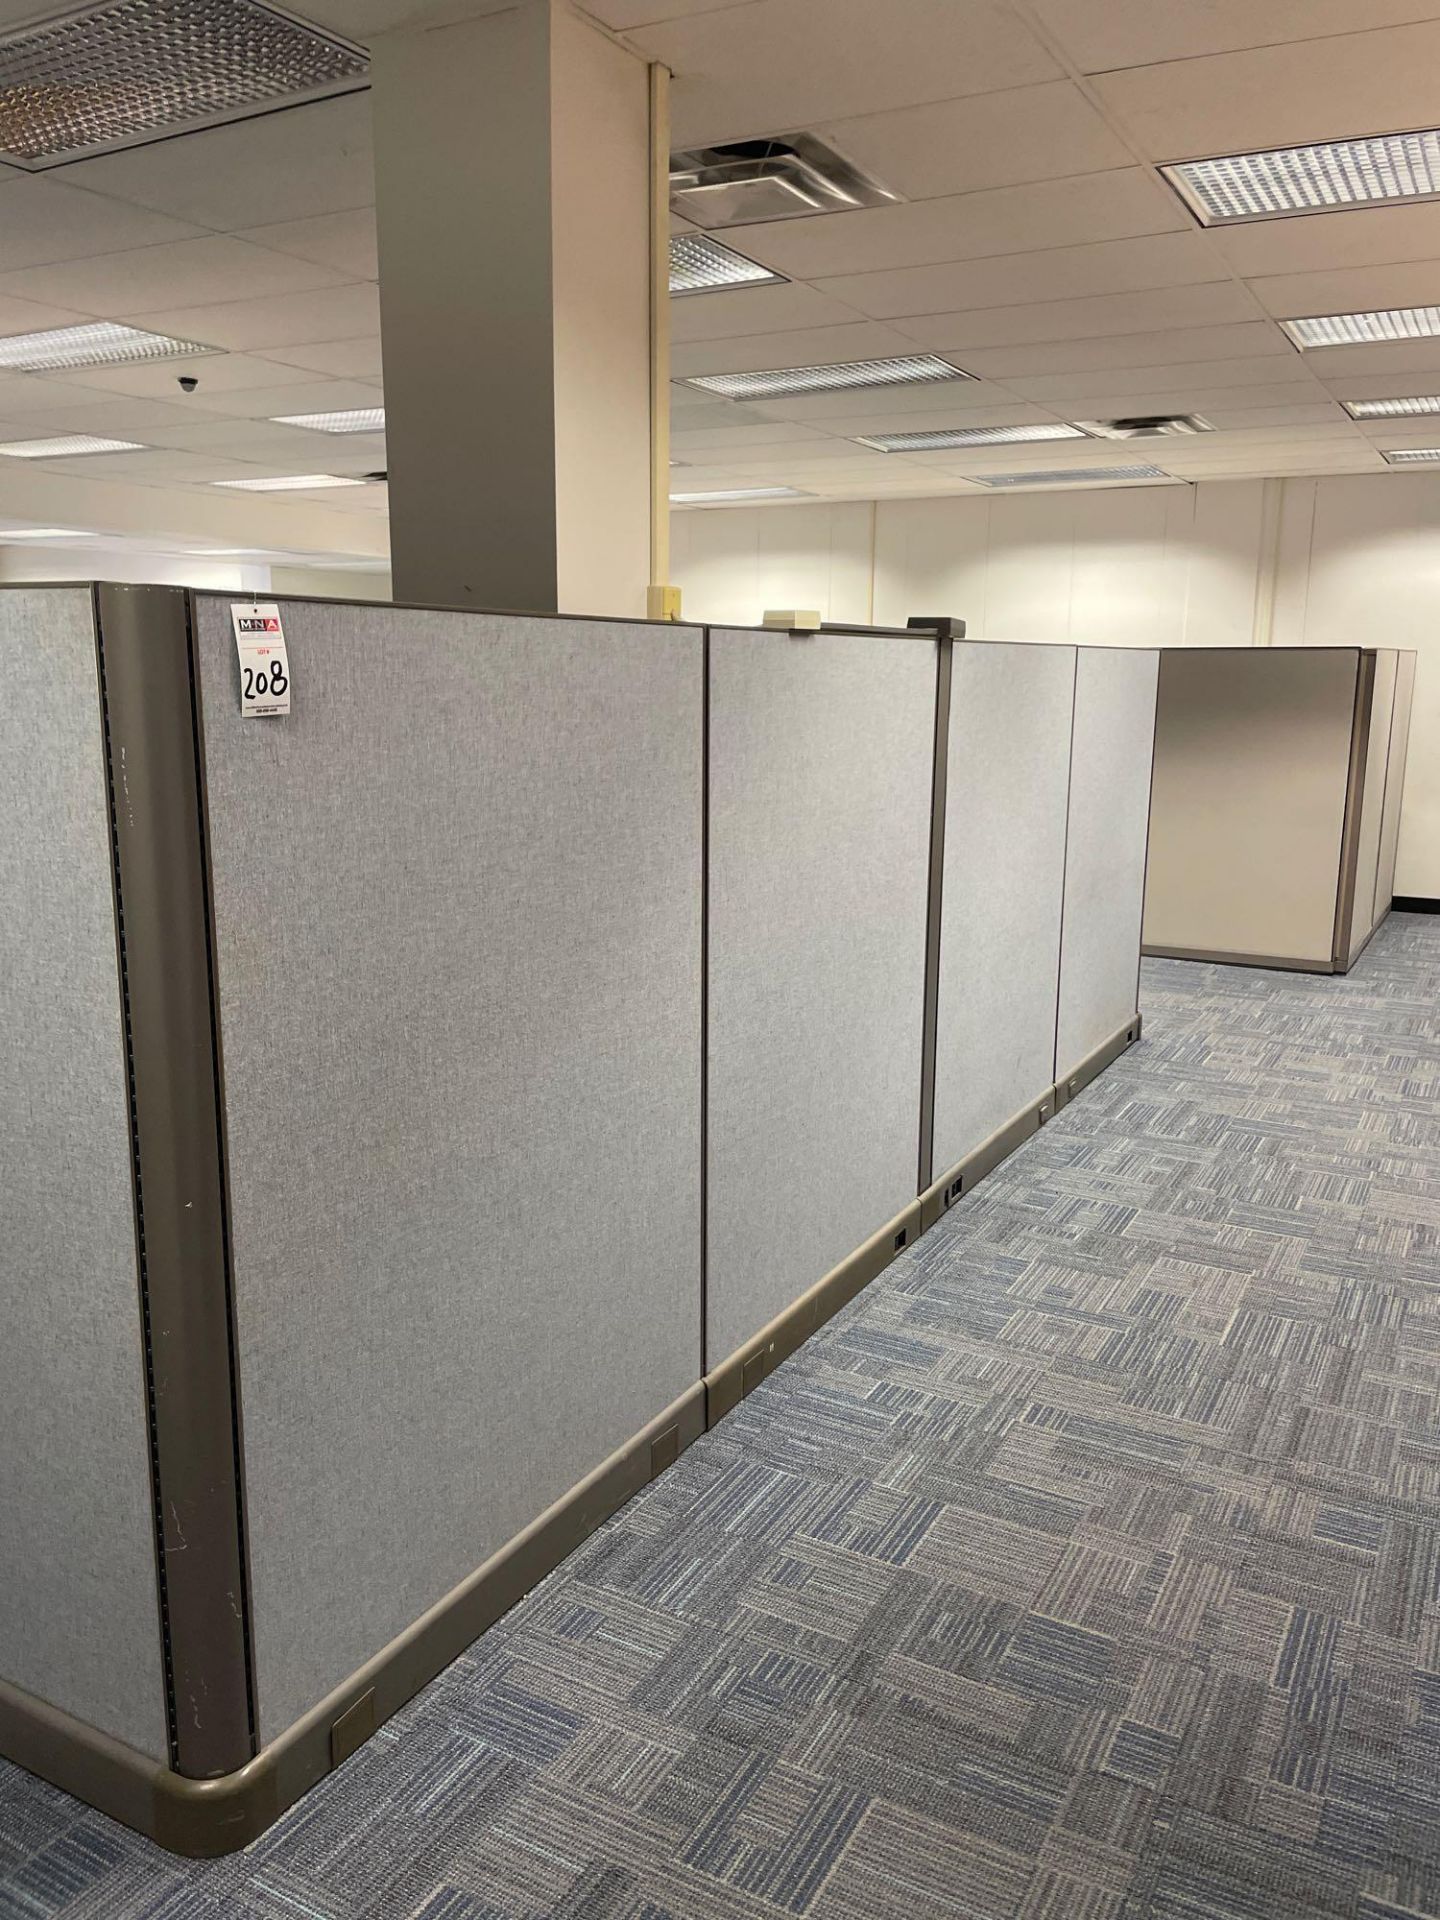 Cubicles, Desks, & Chairs - Image 2 of 7